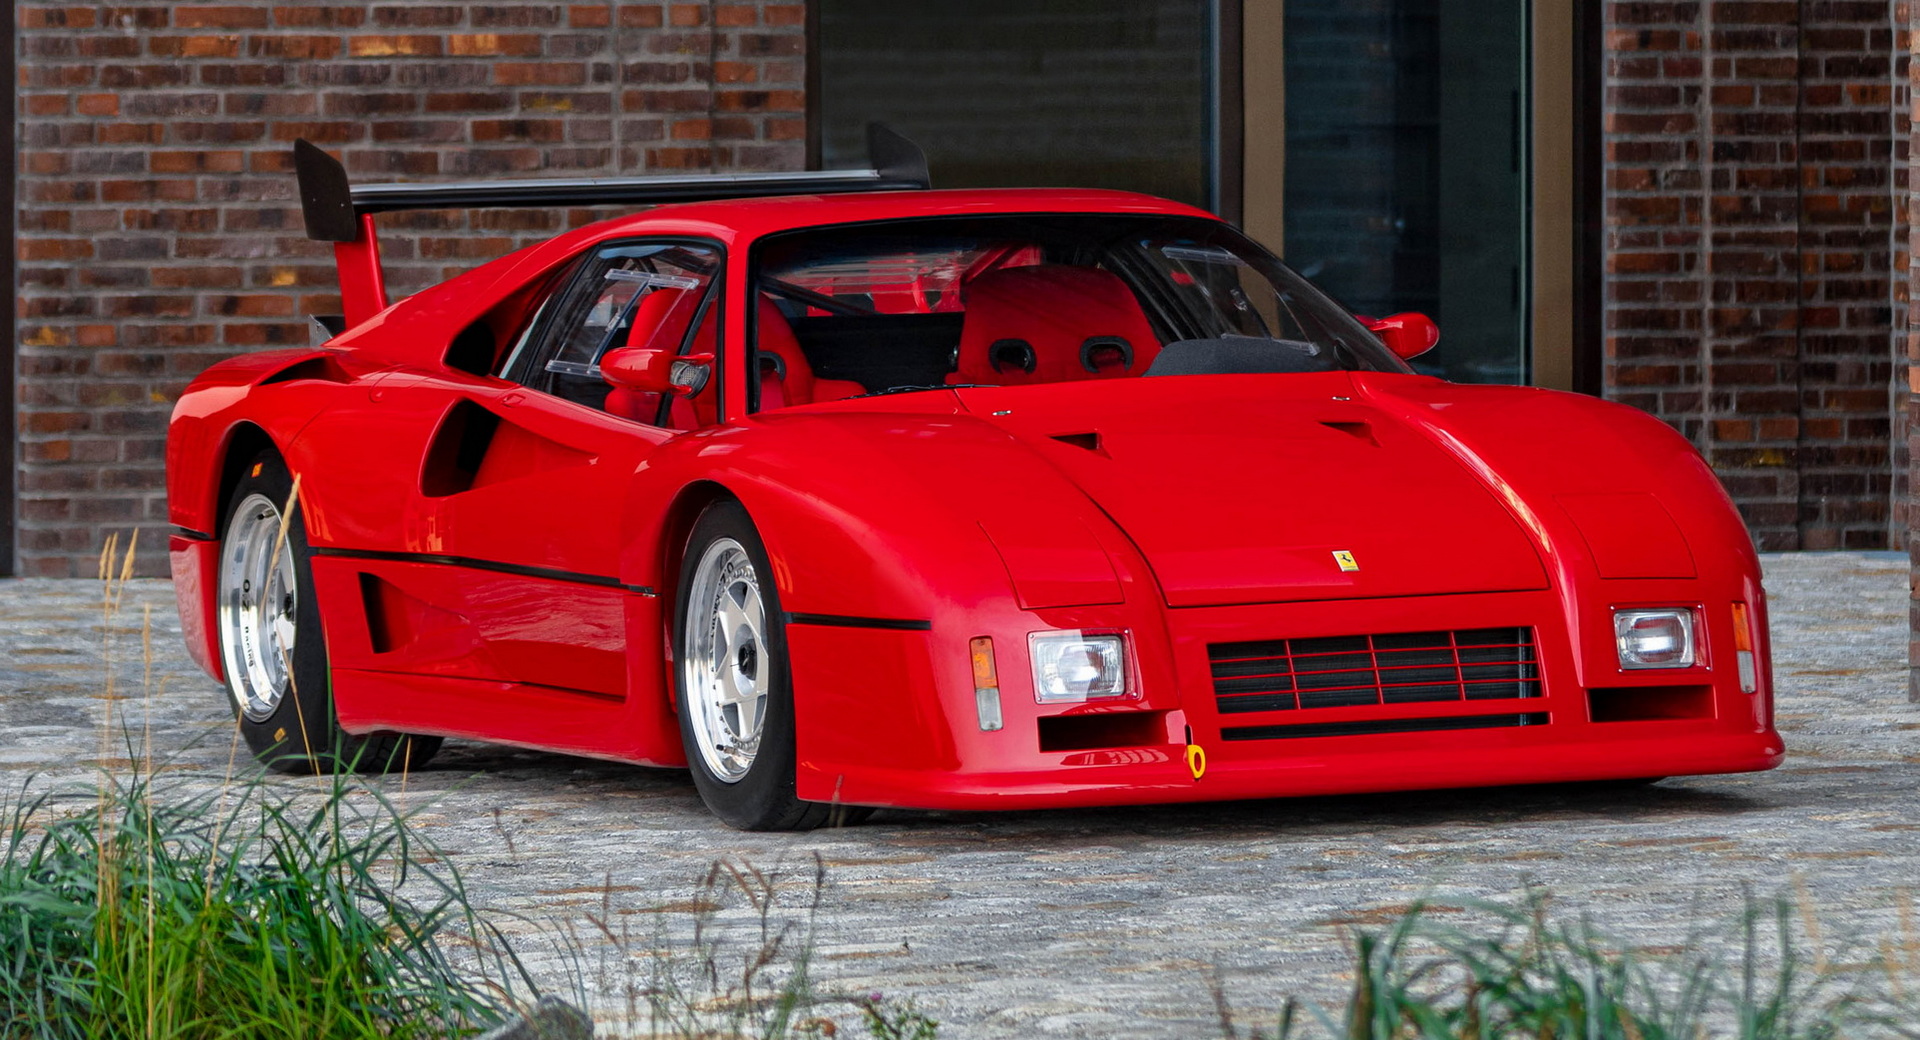 How much would you pay for this mint Ferrari 288 GTO Evoluzione?